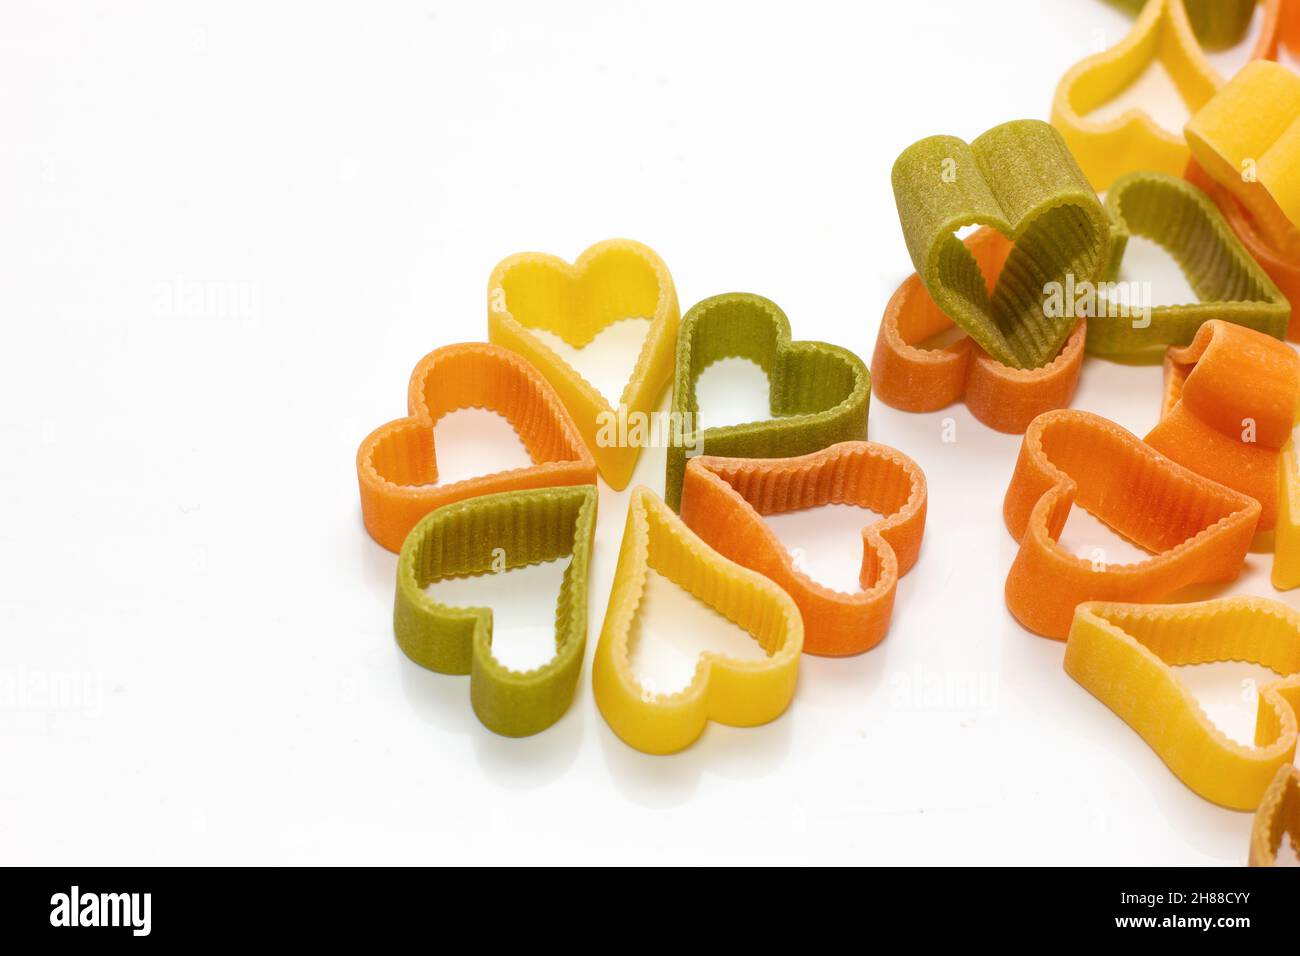 red, white, green pasta in the shape of a heart on a white background. Food concept. Stock Photo